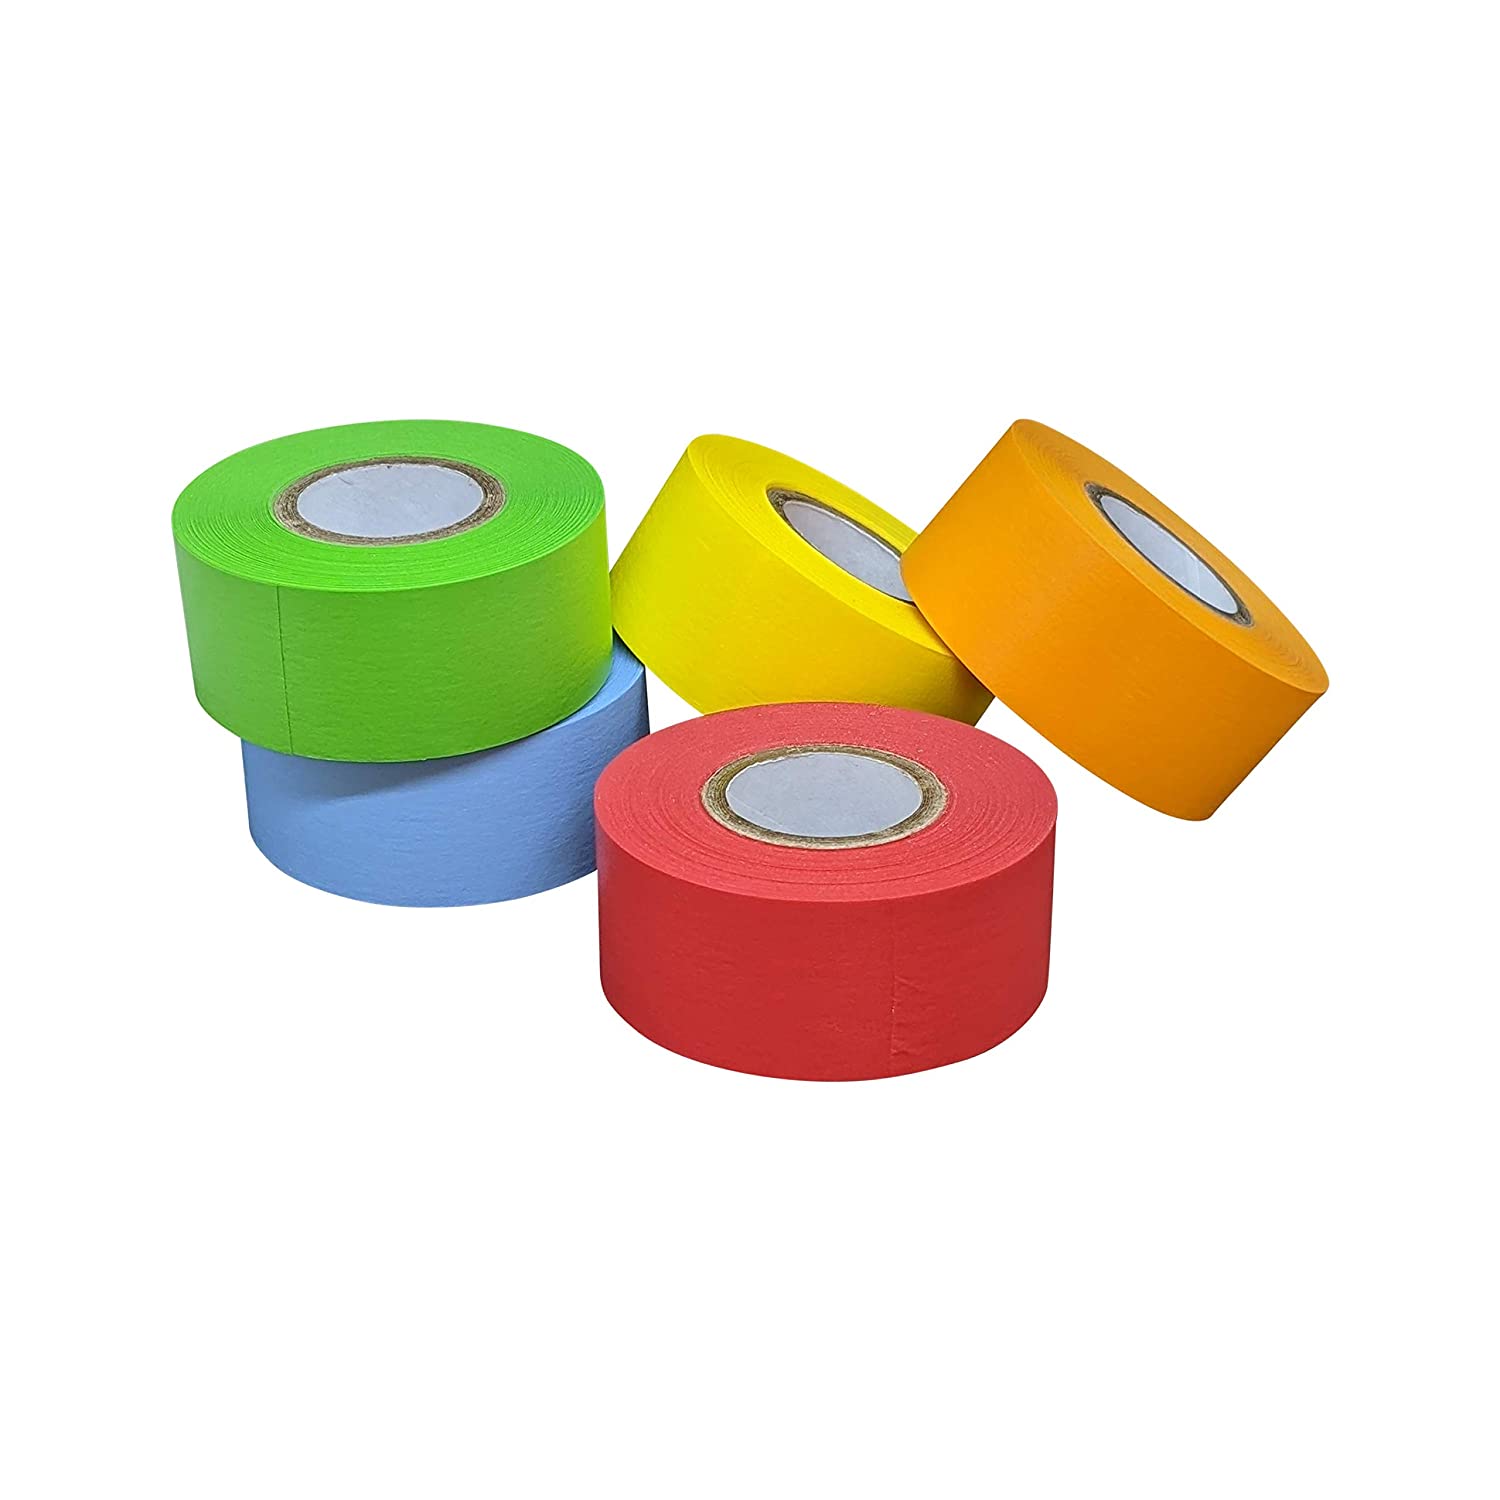 Lab Labeling Tape Variety Pack, 500″ Length x Various Widths, 1 Inch Core  [5 Rolls of Assorted Colors] for Color Coding and Marking